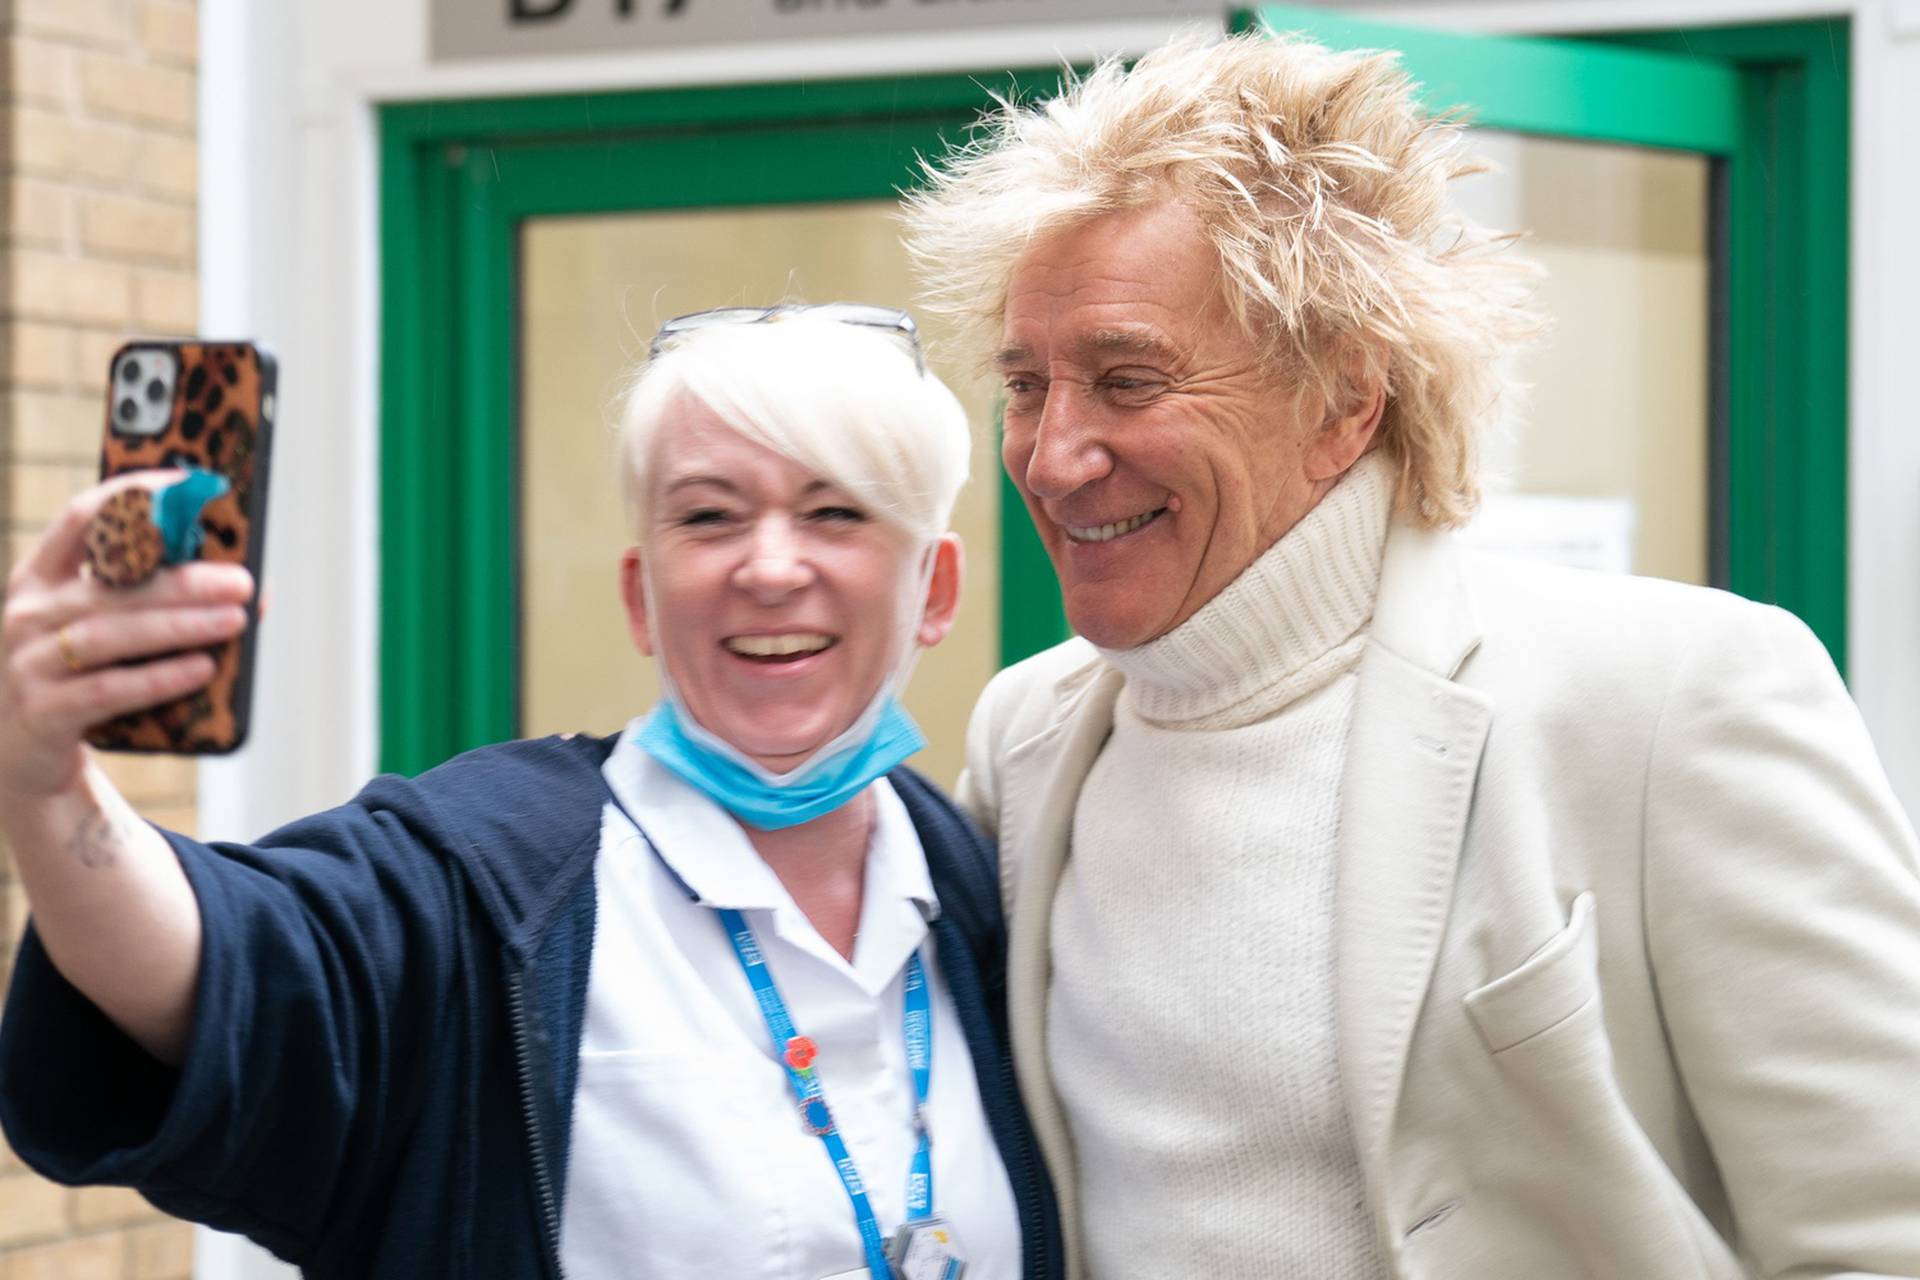 Rod Stewart hospital scan payments